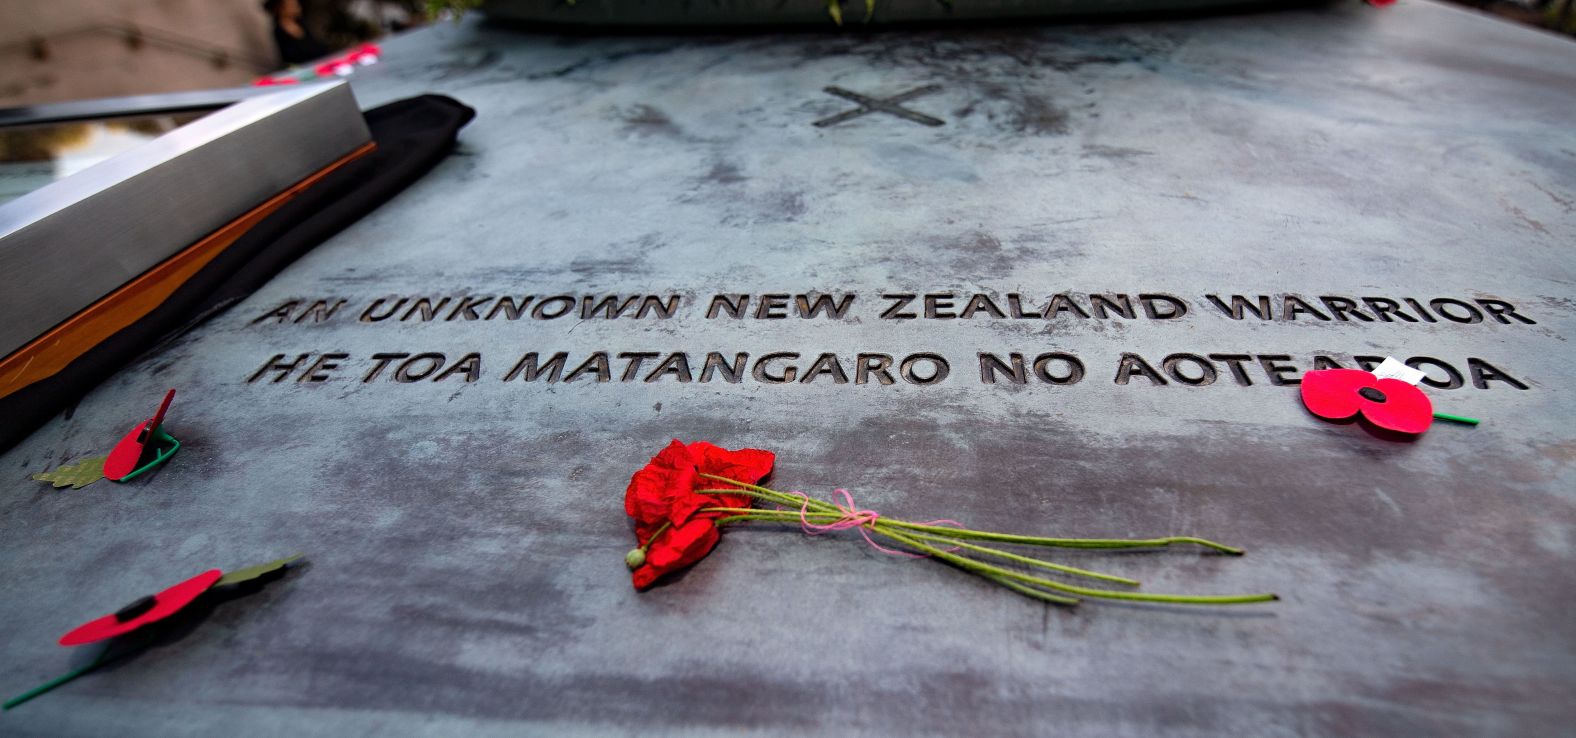 Poppies lie on the tomb during a Mounting of the Vigil and dressing of the Tomb of the Unknown Warrior commemoration starting the ceremony  at the National War Memorial in Wellington, New Zealand on Sunday.